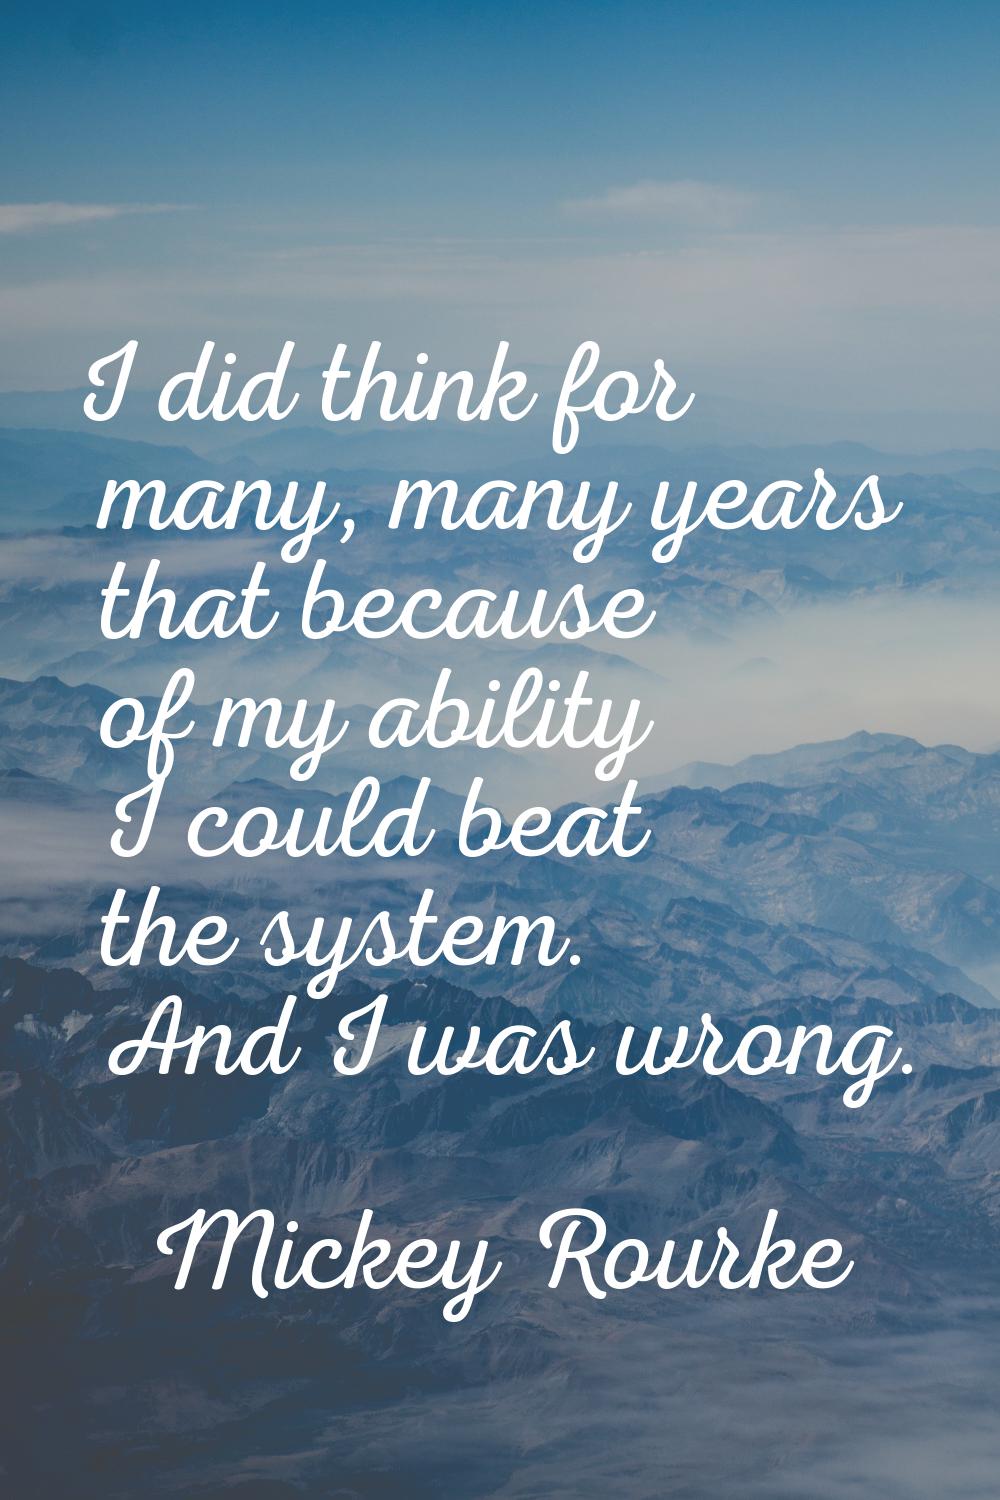 I did think for many, many years that because of my ability I could beat the system. And I was wron